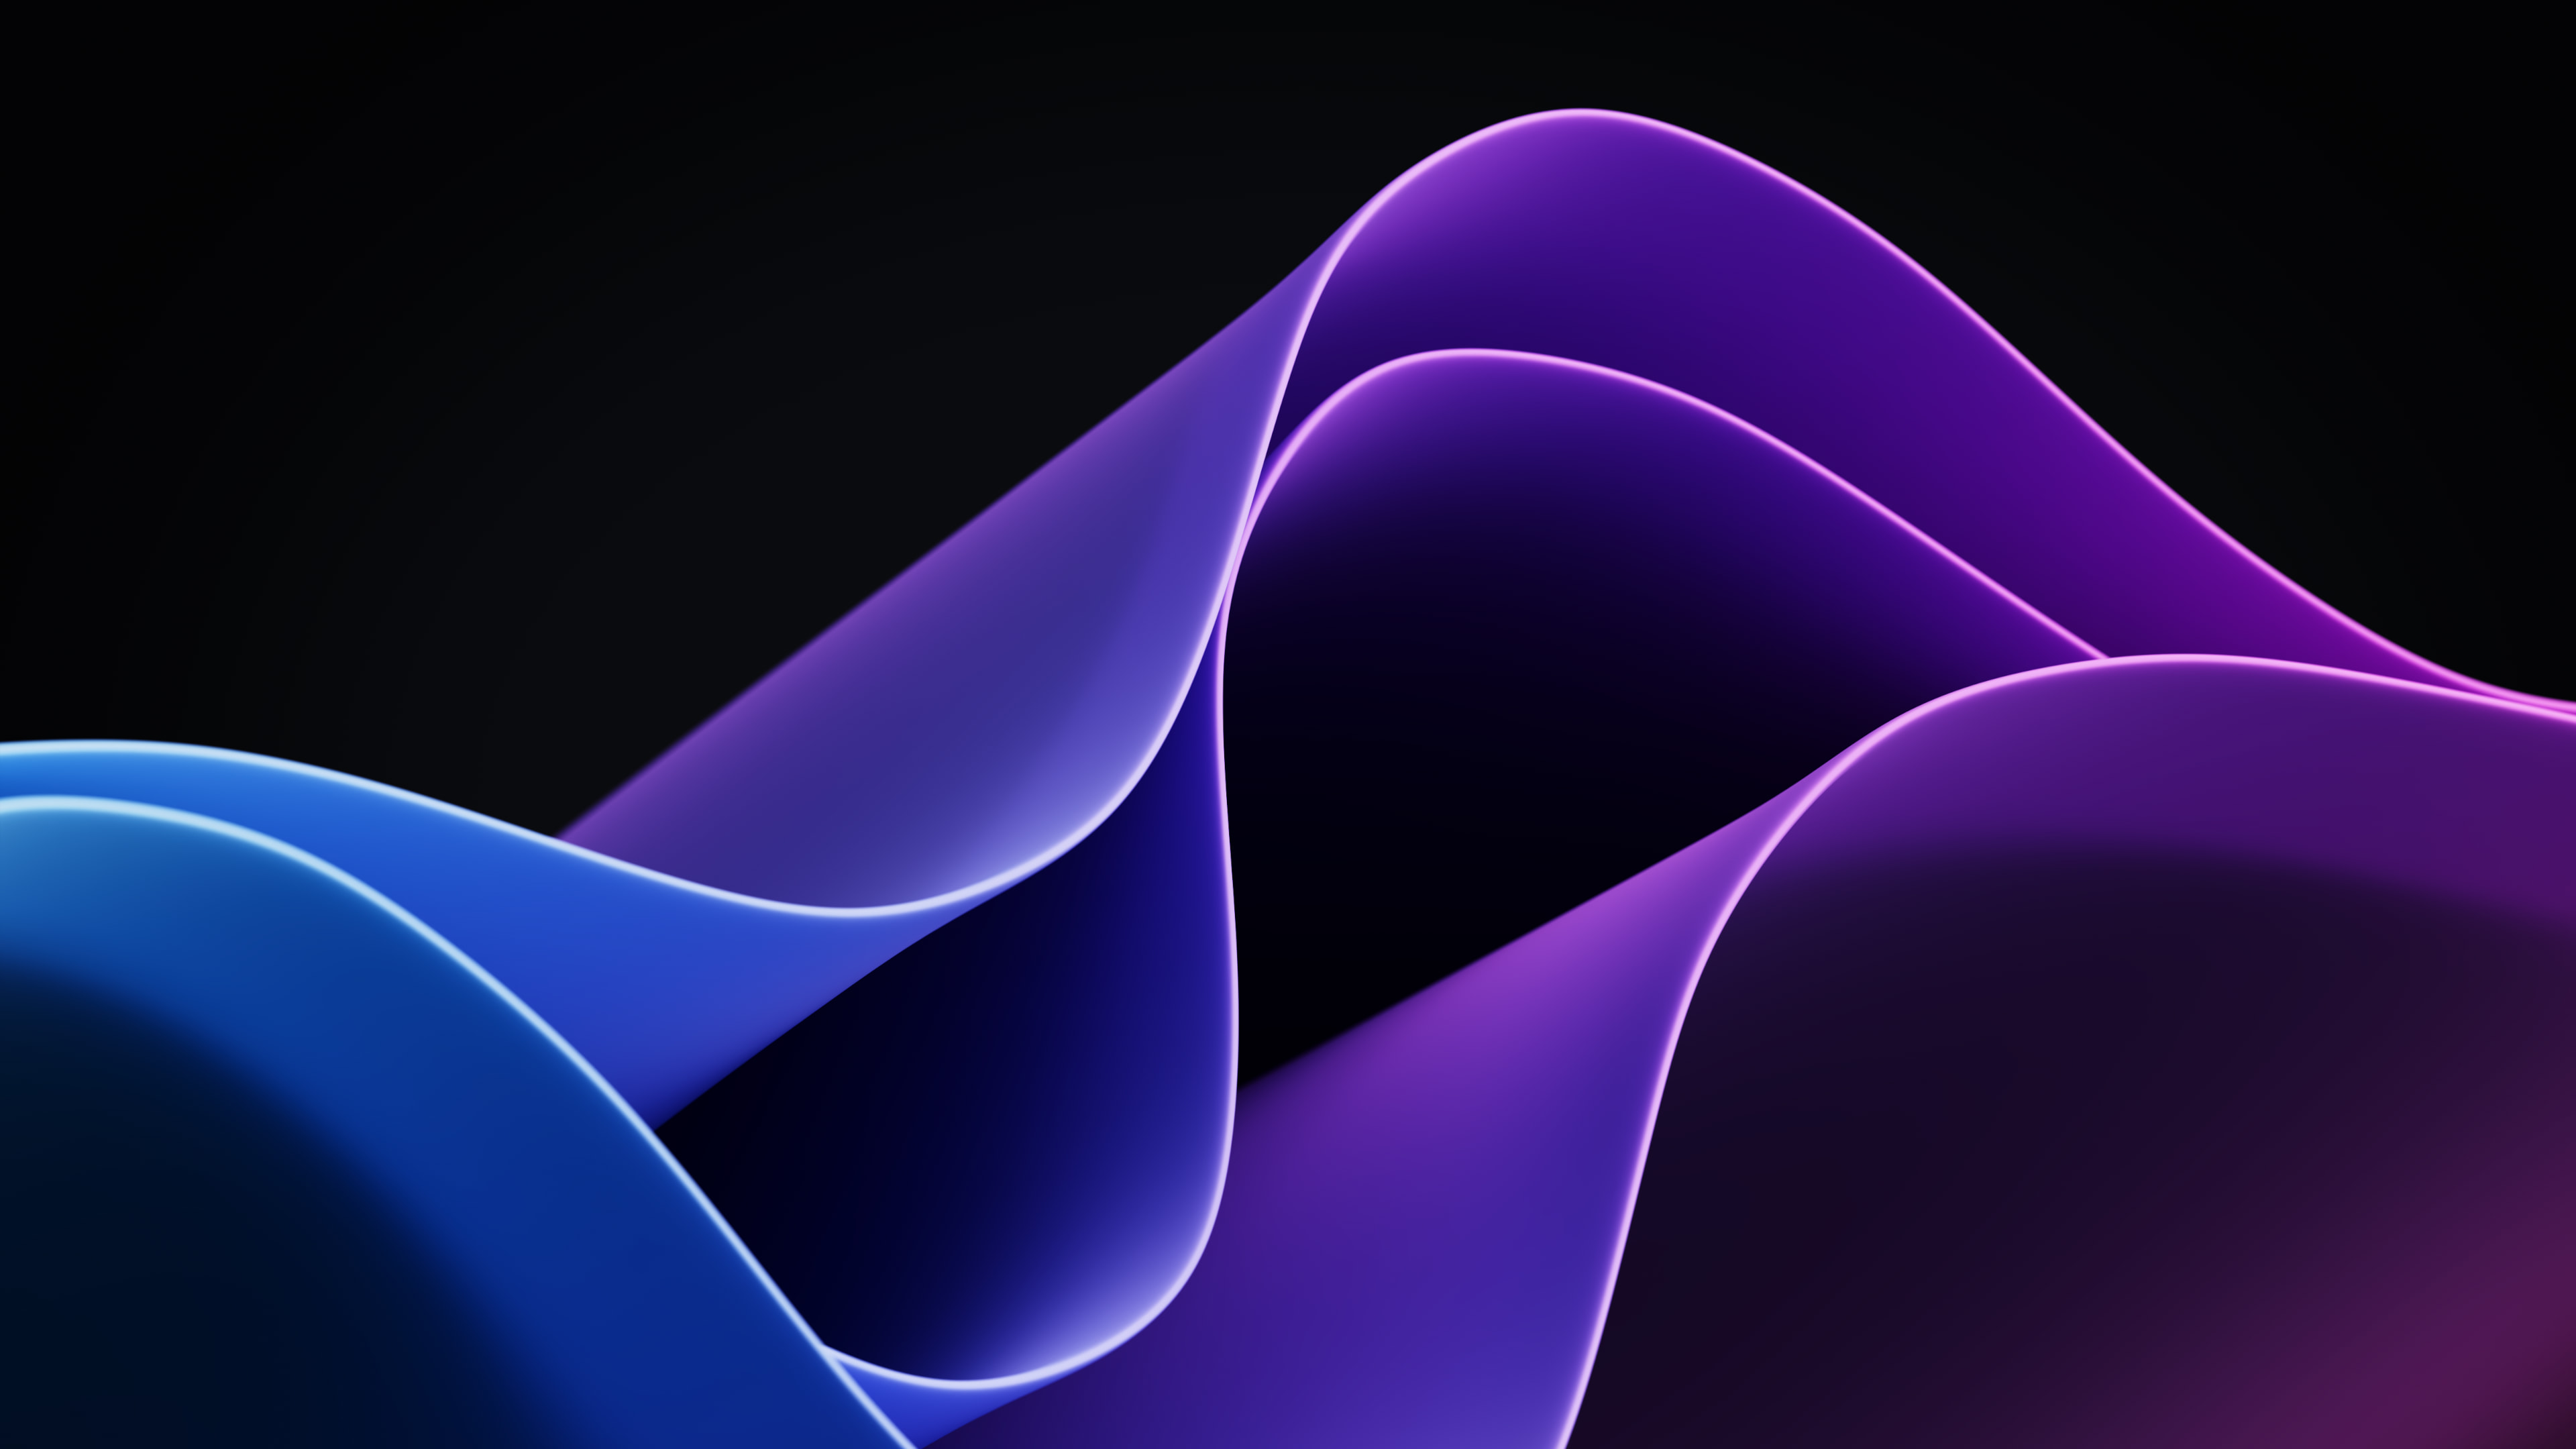 A mesmerizing 4K wallpaper showcasing abstract waves in dark purple hues, inspired by the aesthetic of Windows 11. This digital art wallpaper exudes a sense of modernity and technology.